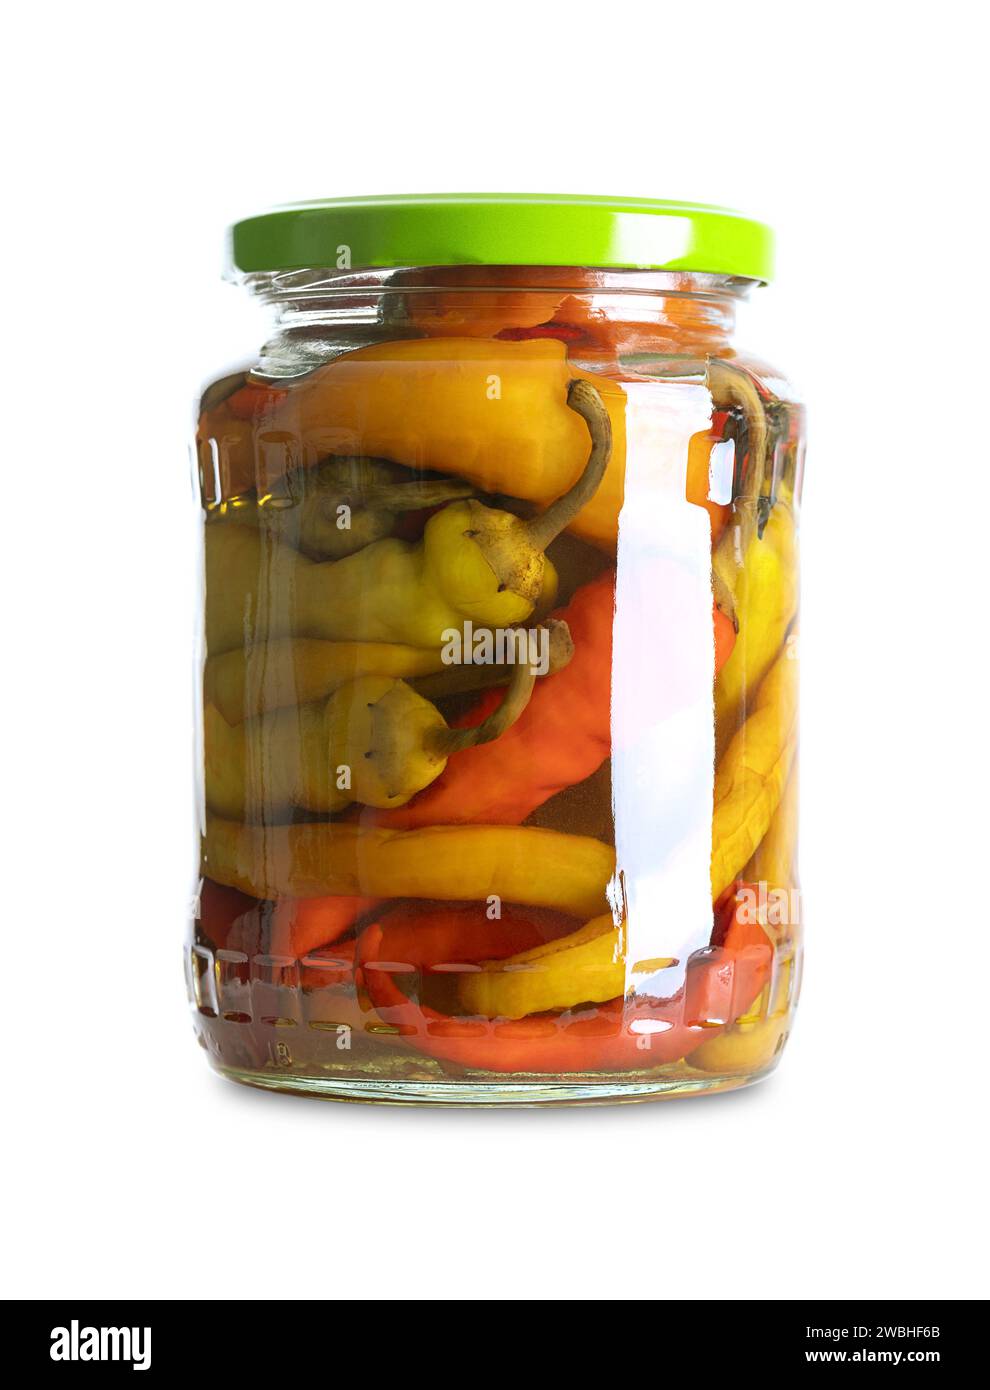 Pepperonis, pickled cayenne peppers in a glass jar. Green, red, and yellow fruits of moderately hot chili peppers, pasteurized and preserved in brine. Stock Photo